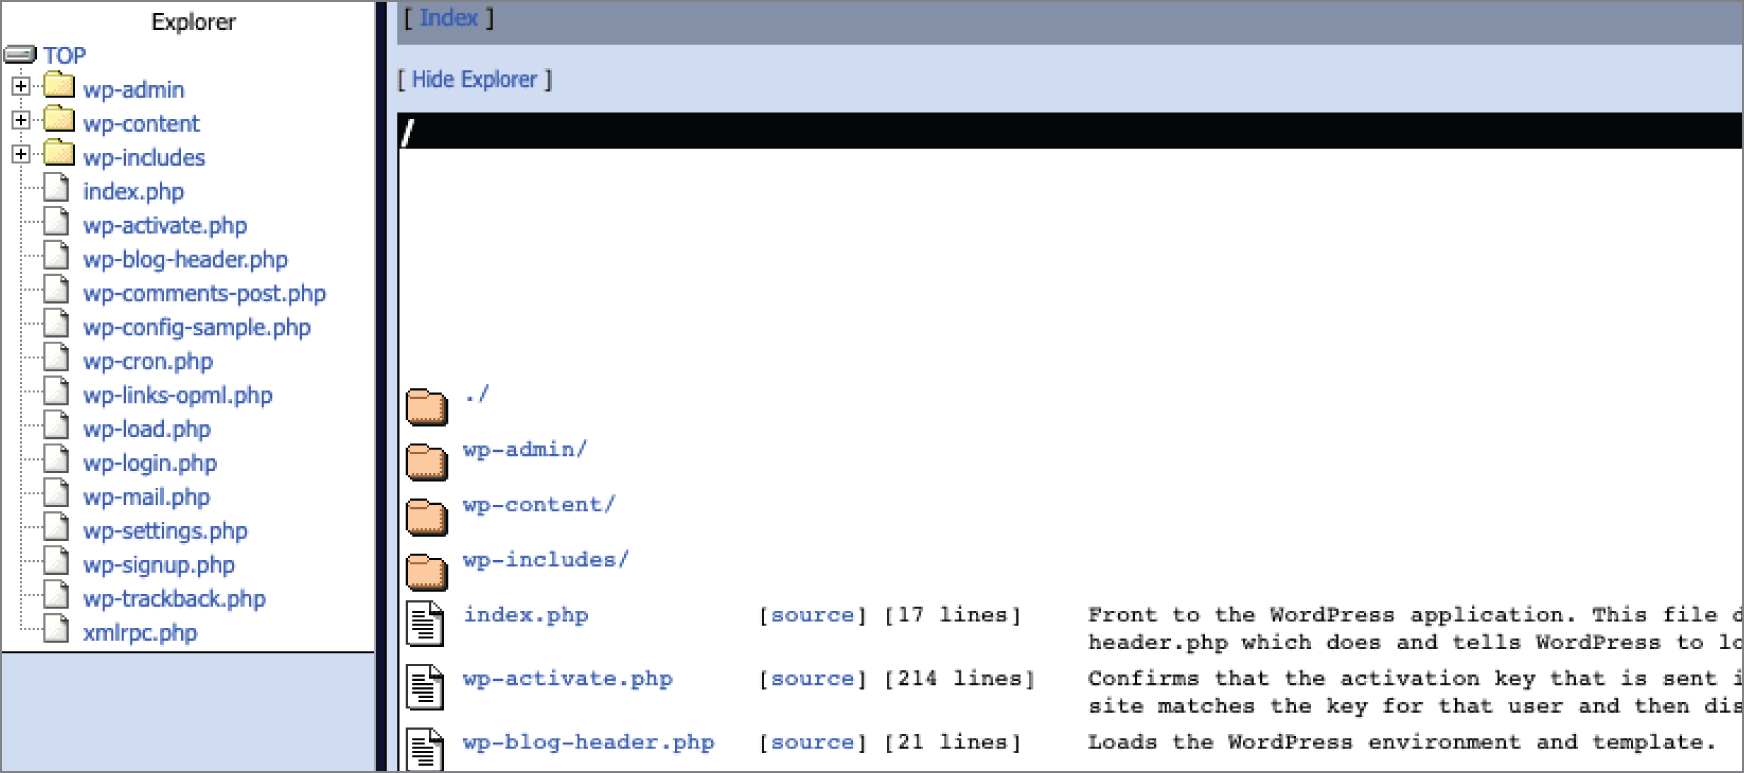 Screenshot of a Windows Explorer layout of the WordPress PHPXref site displaying the documentation of cross-referenced HTML files.